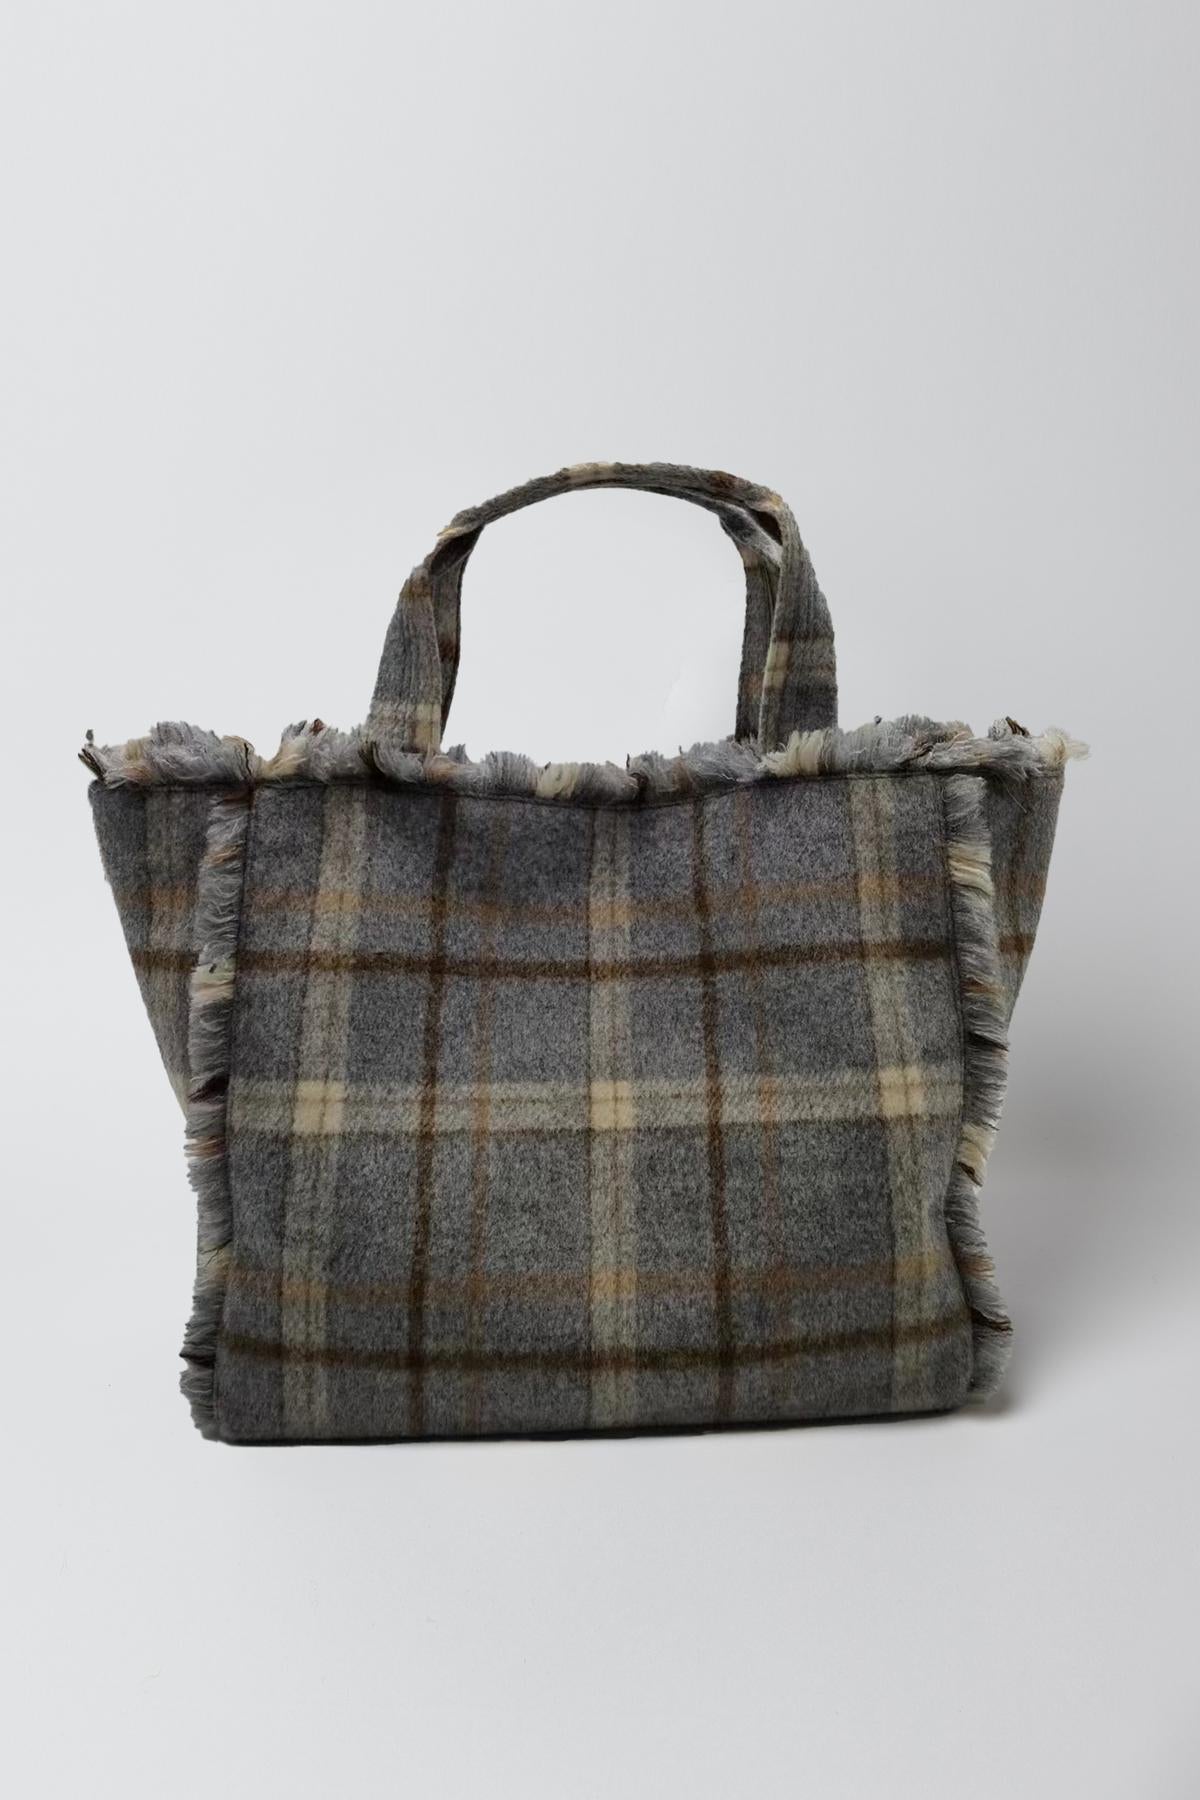 Frayed Flannel Tote in grey plaid-26749490069697